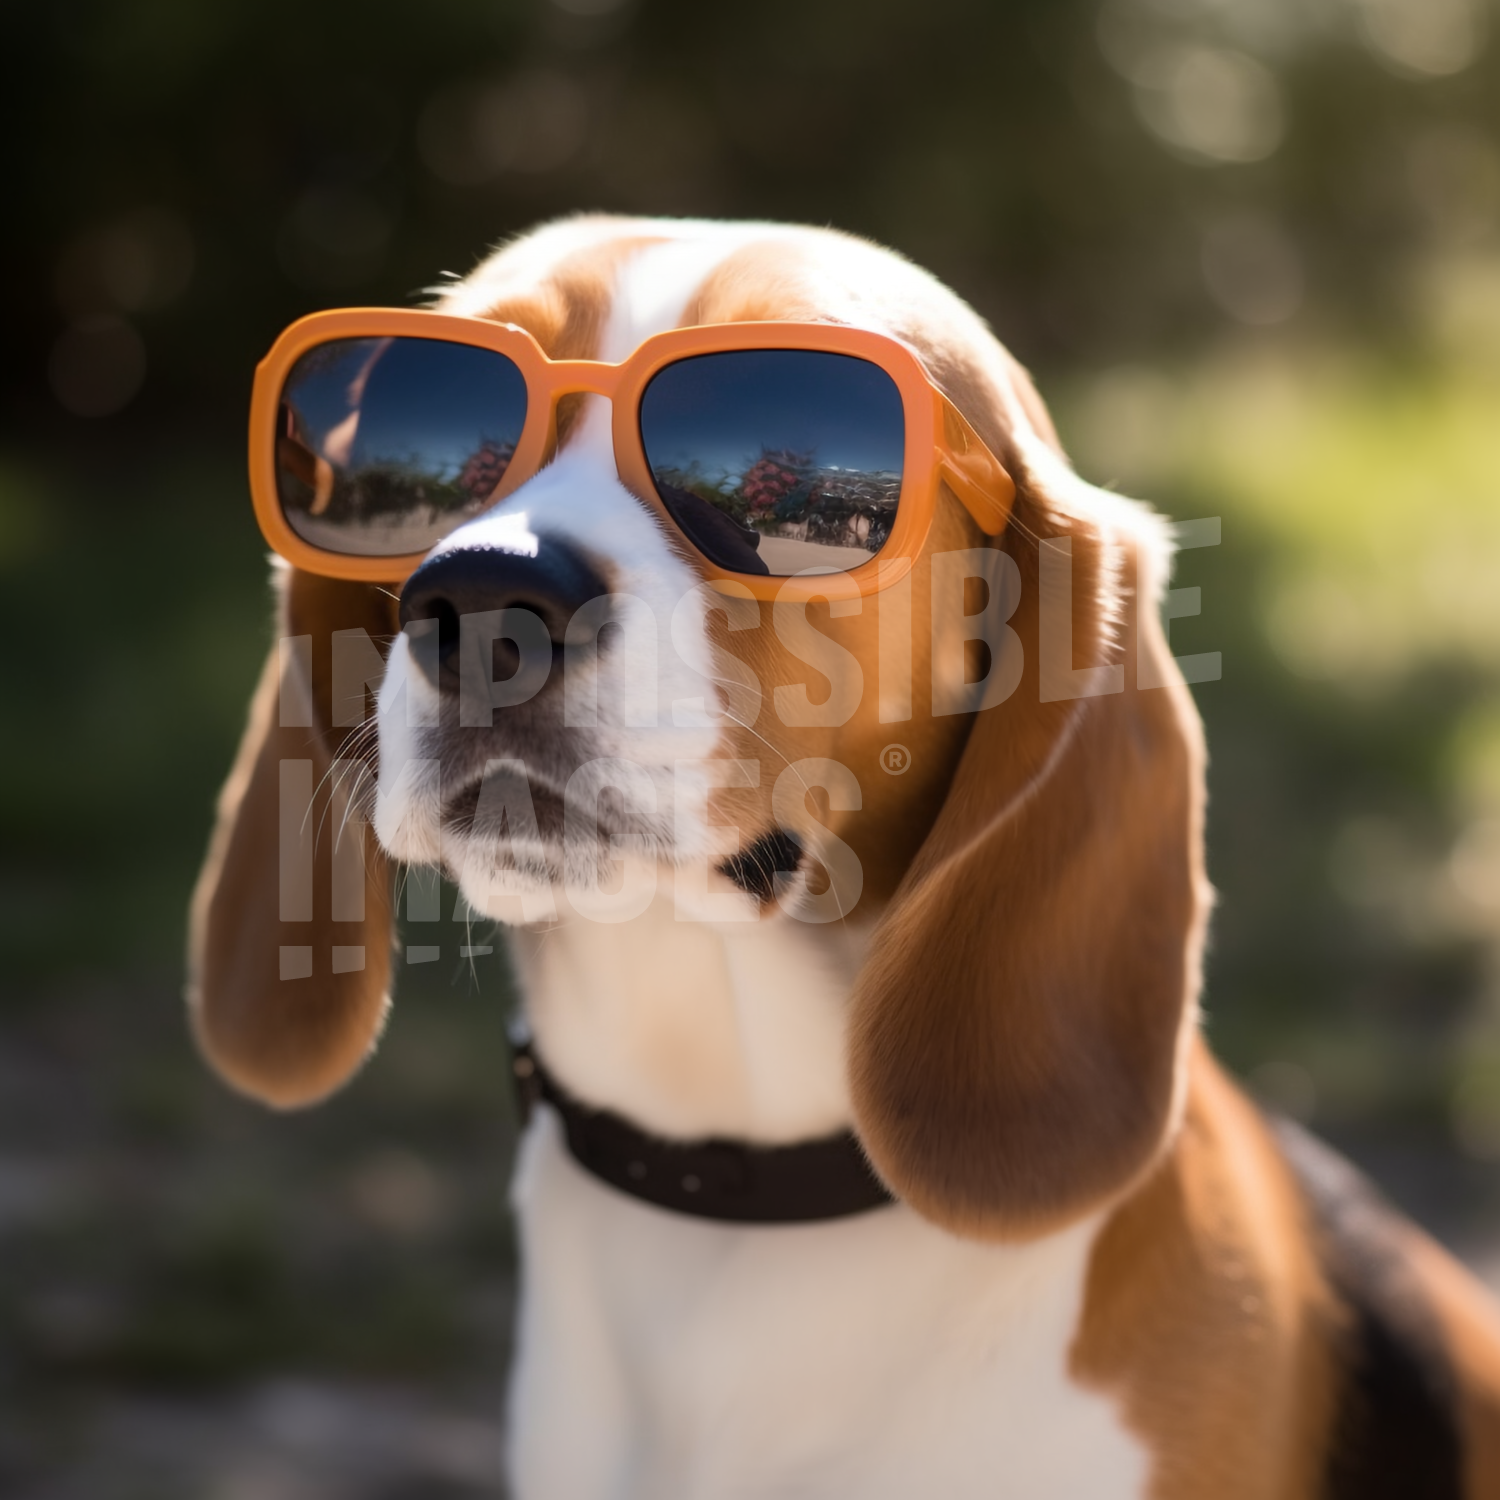 A beagle dog wearing a pair of sunglasses